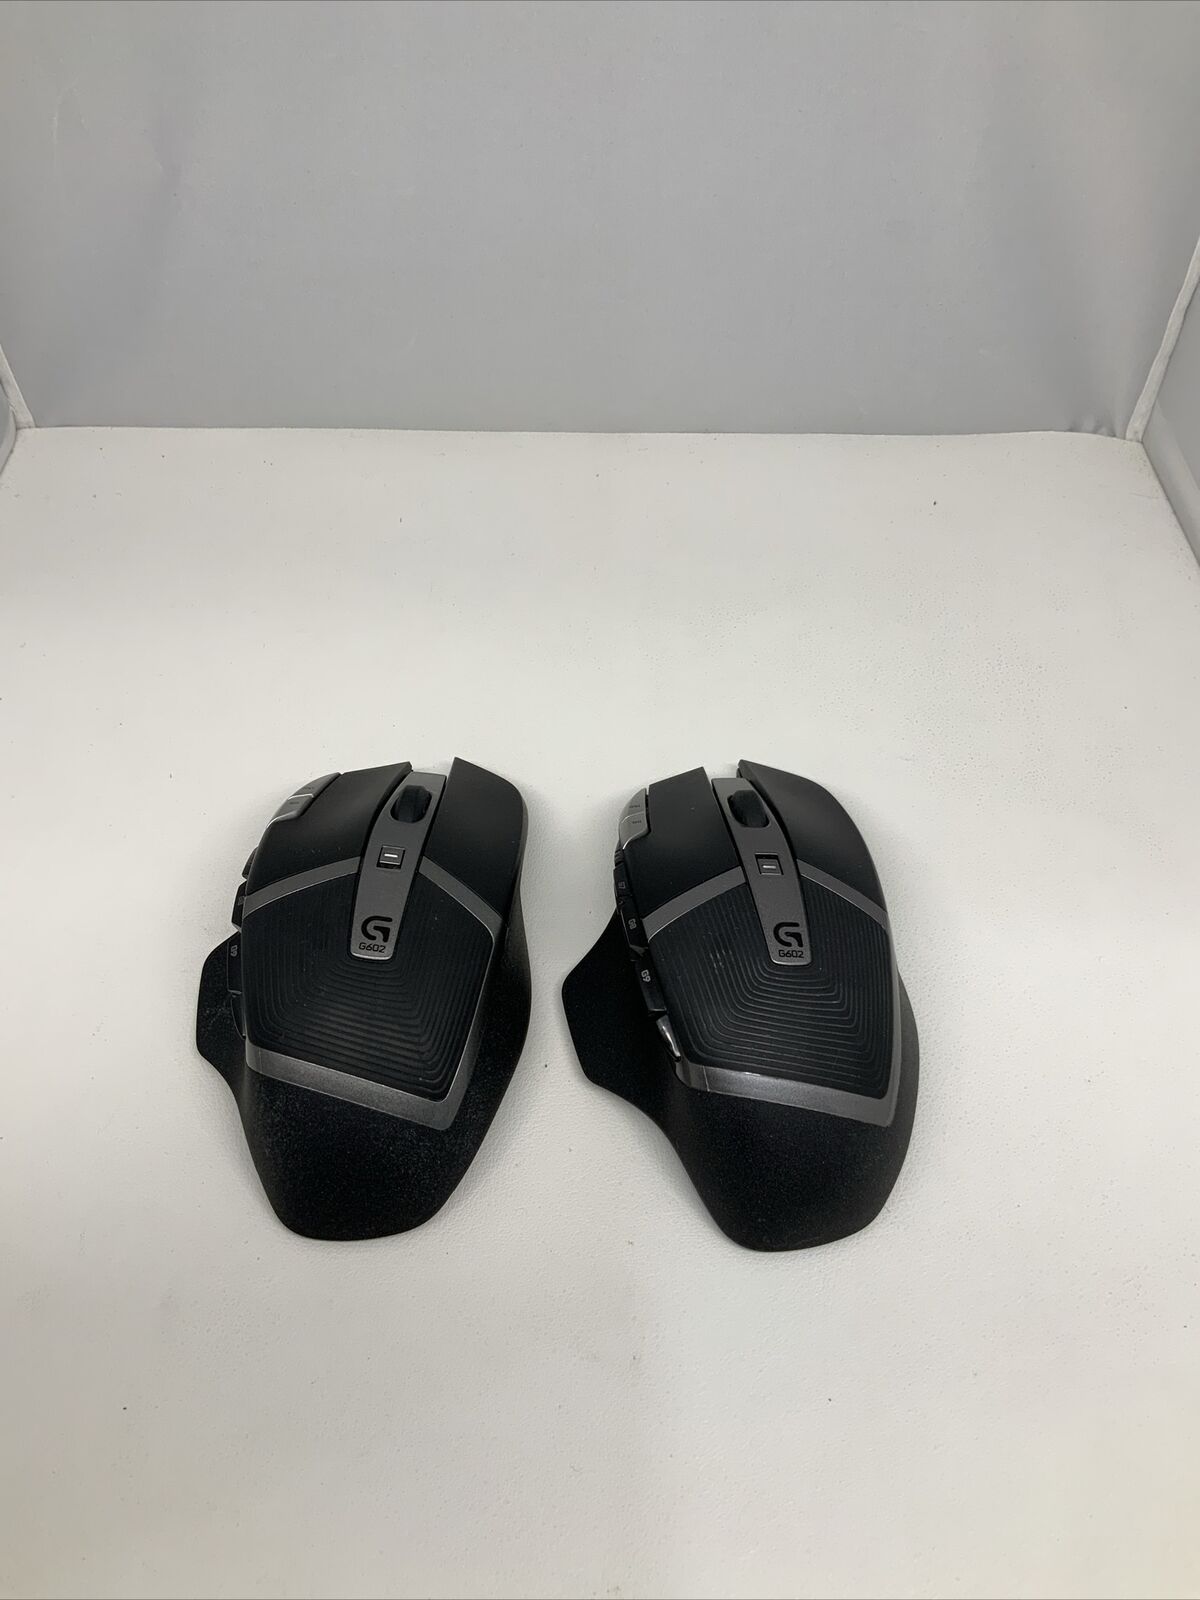 Logitech G602 Wireless Gaming Mouse (No dongle/cable) FOR PARTS read description